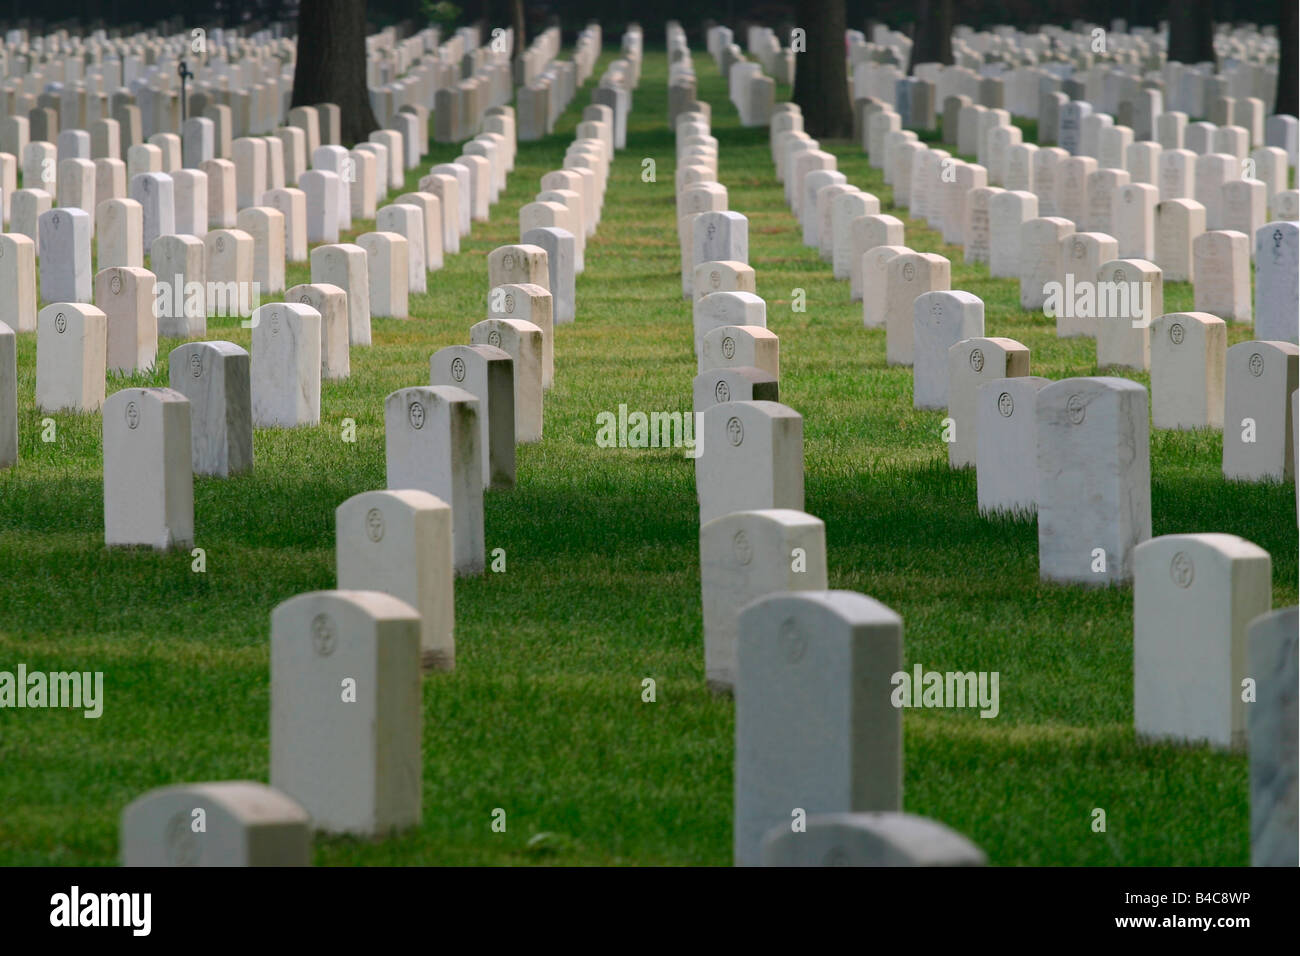 Dozens of unmarked military tombs in a cemetary Stock Photo - Alamy